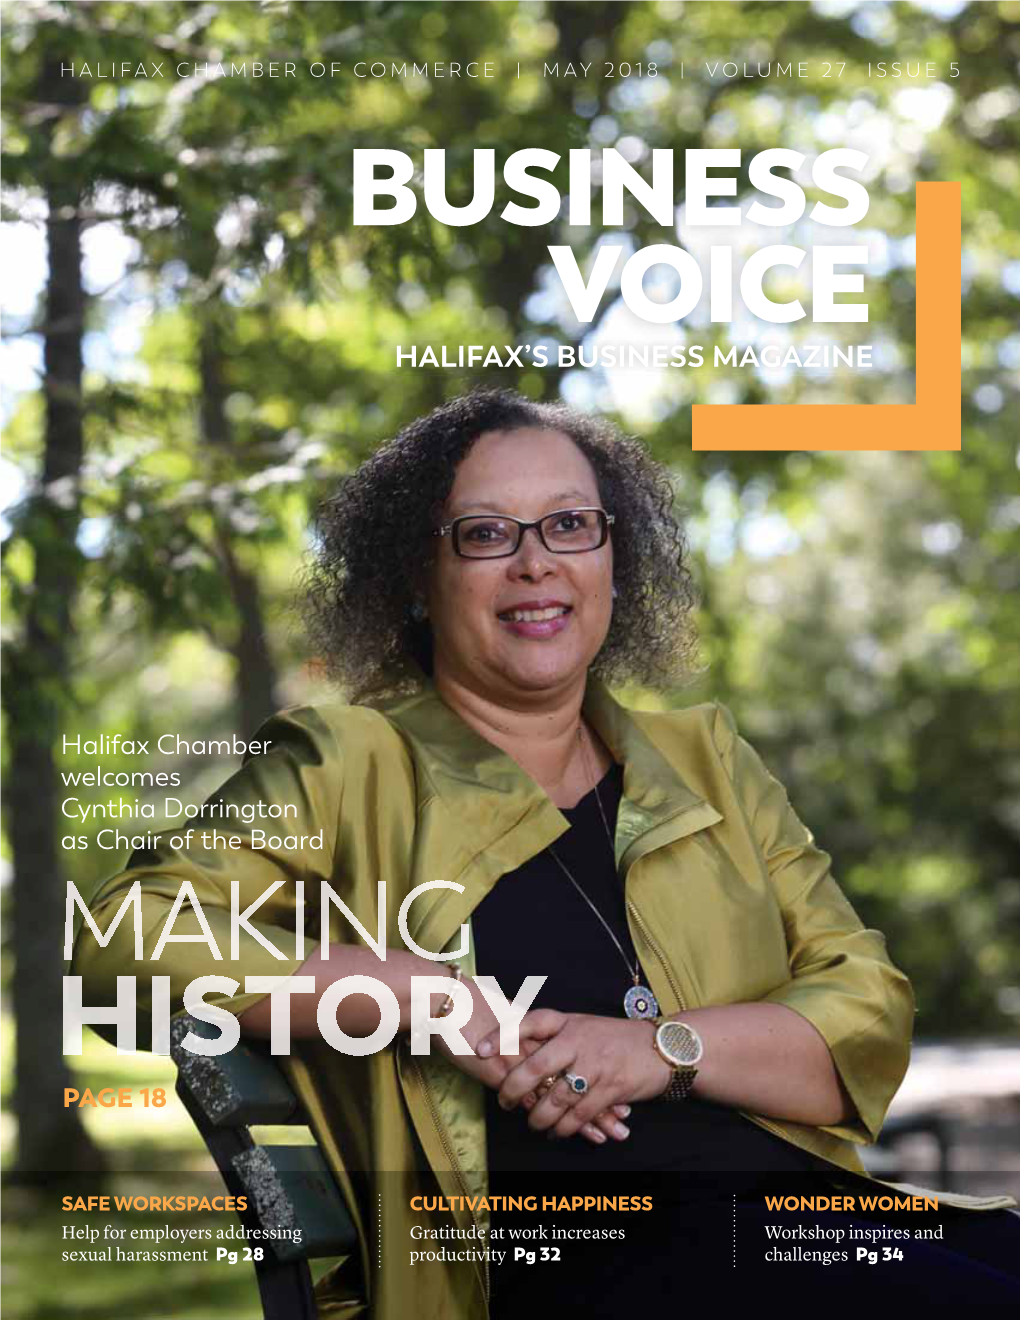 Halifax Chamber Welcomes Cynthia Dorrington As Chair of the Board PAGE 18